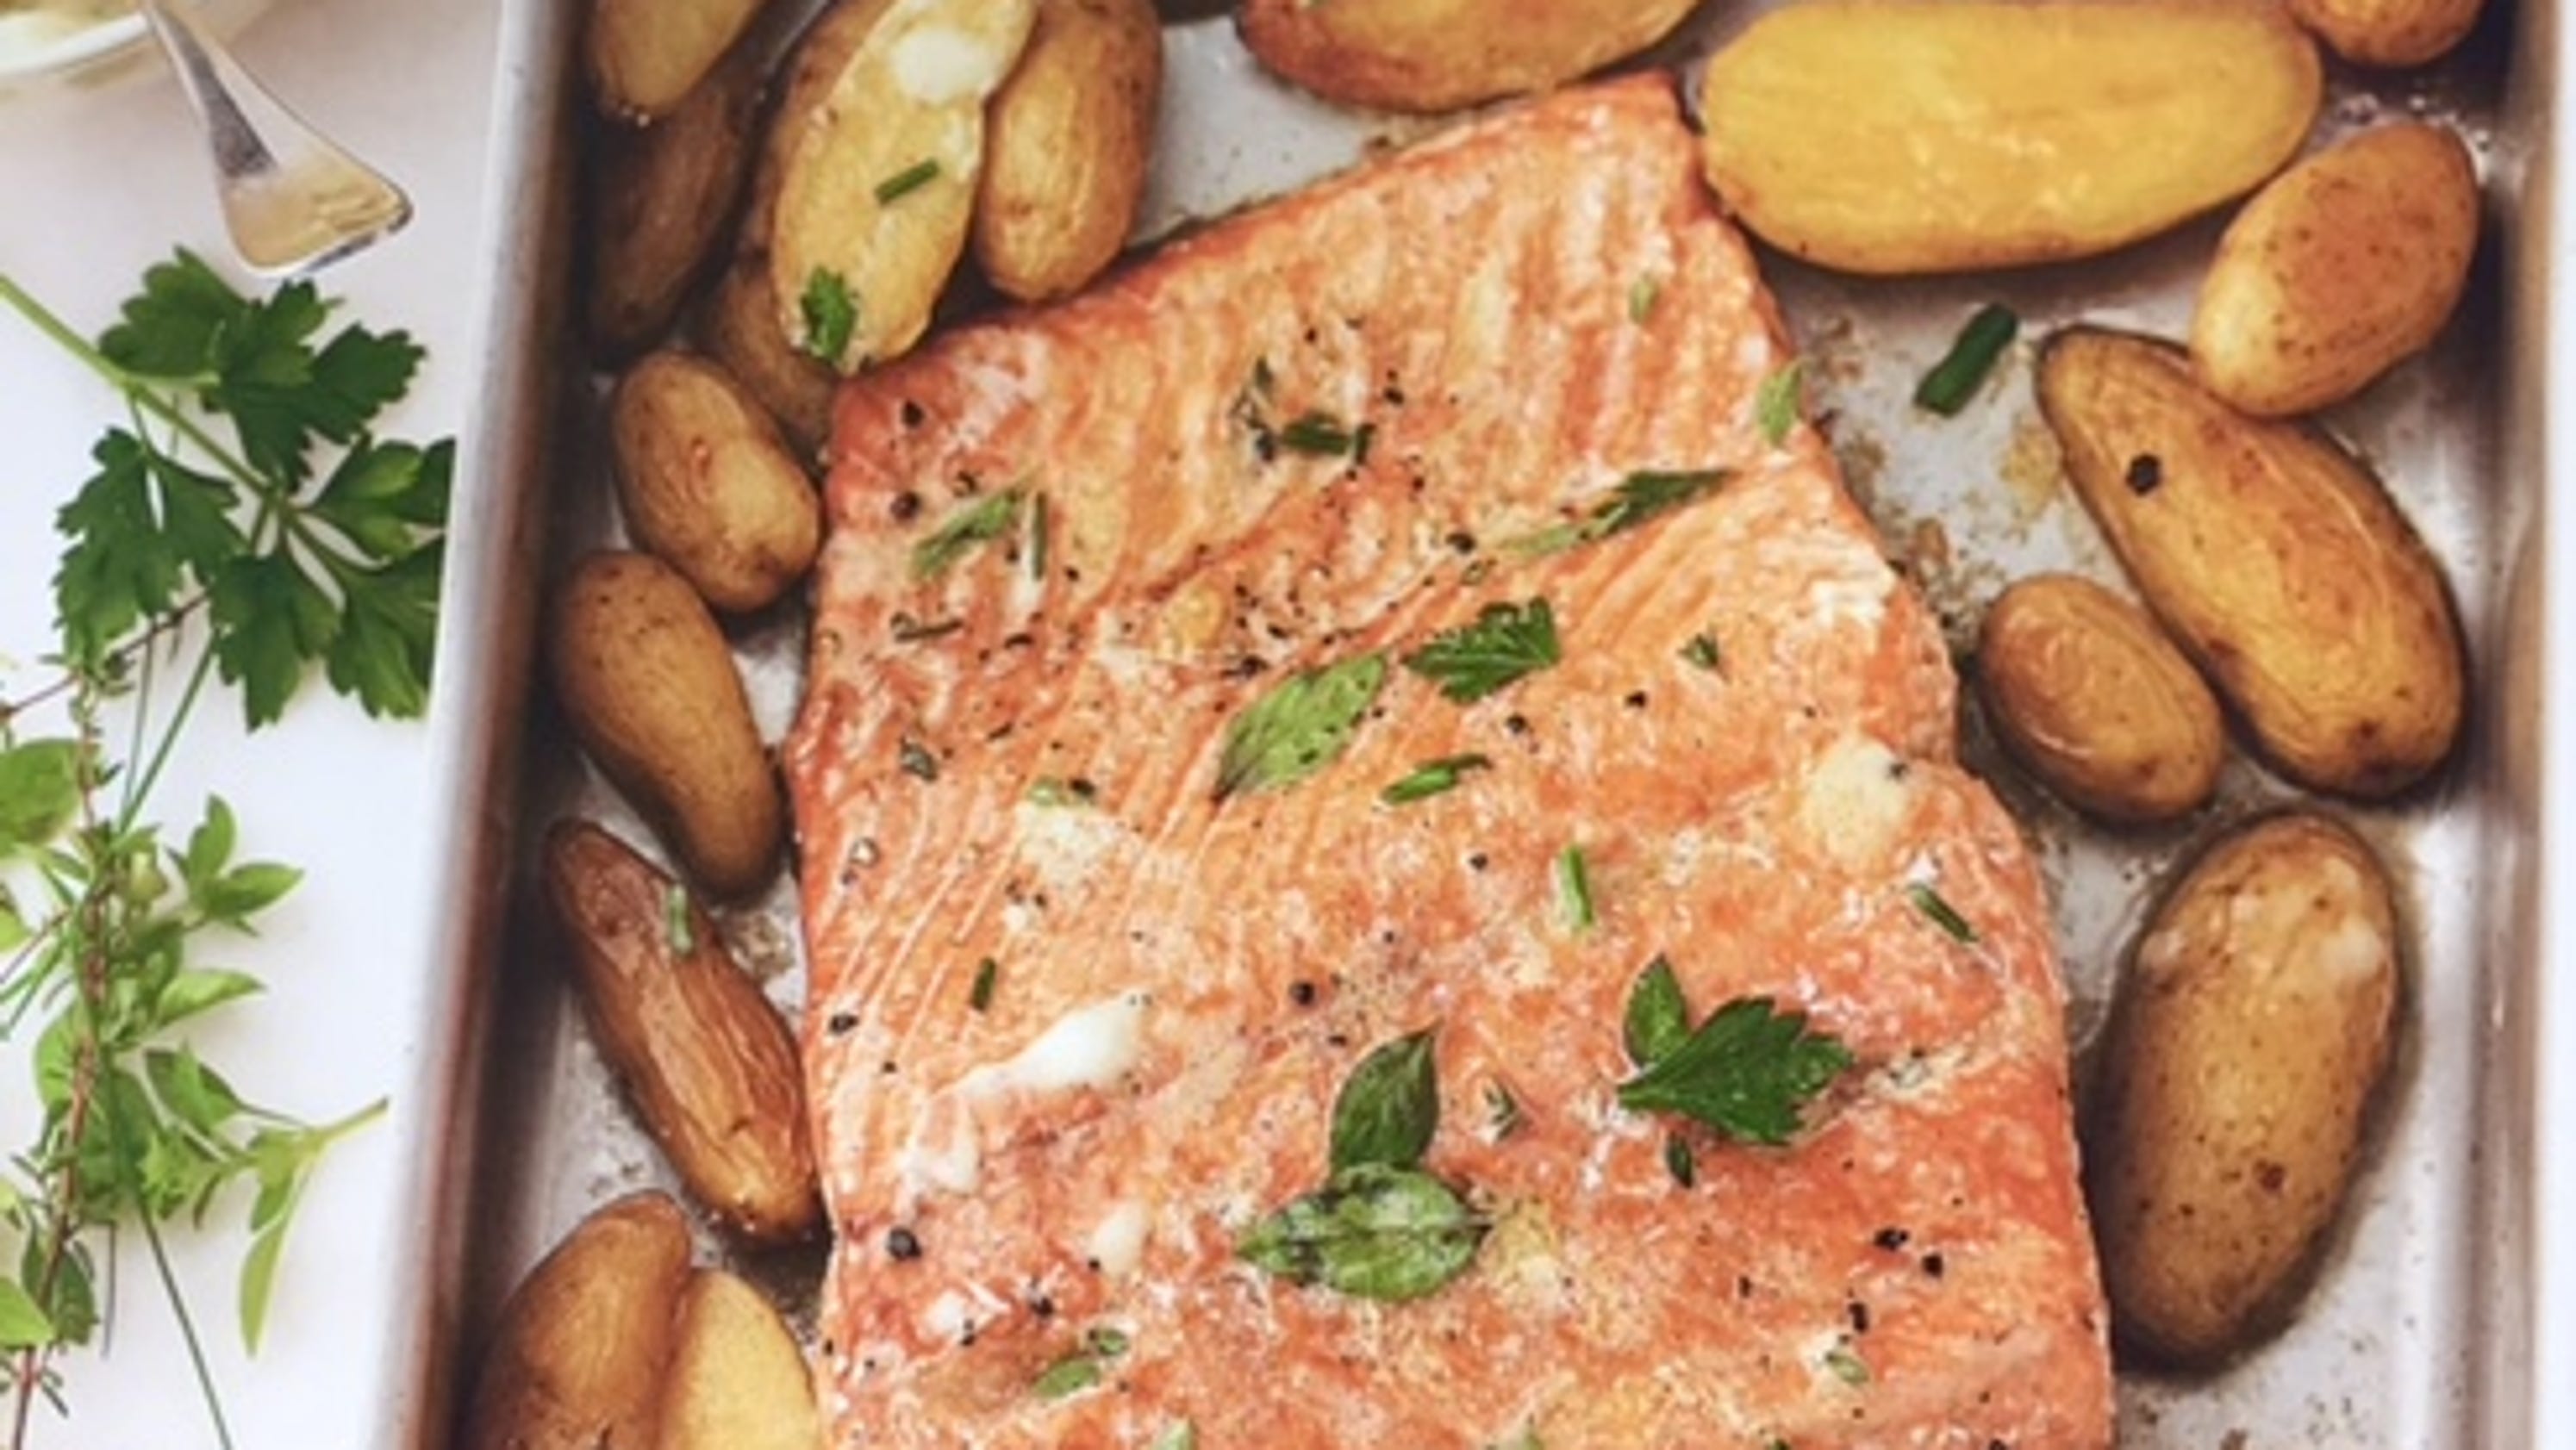 What's for Dinner? Roast salmon and potatoes